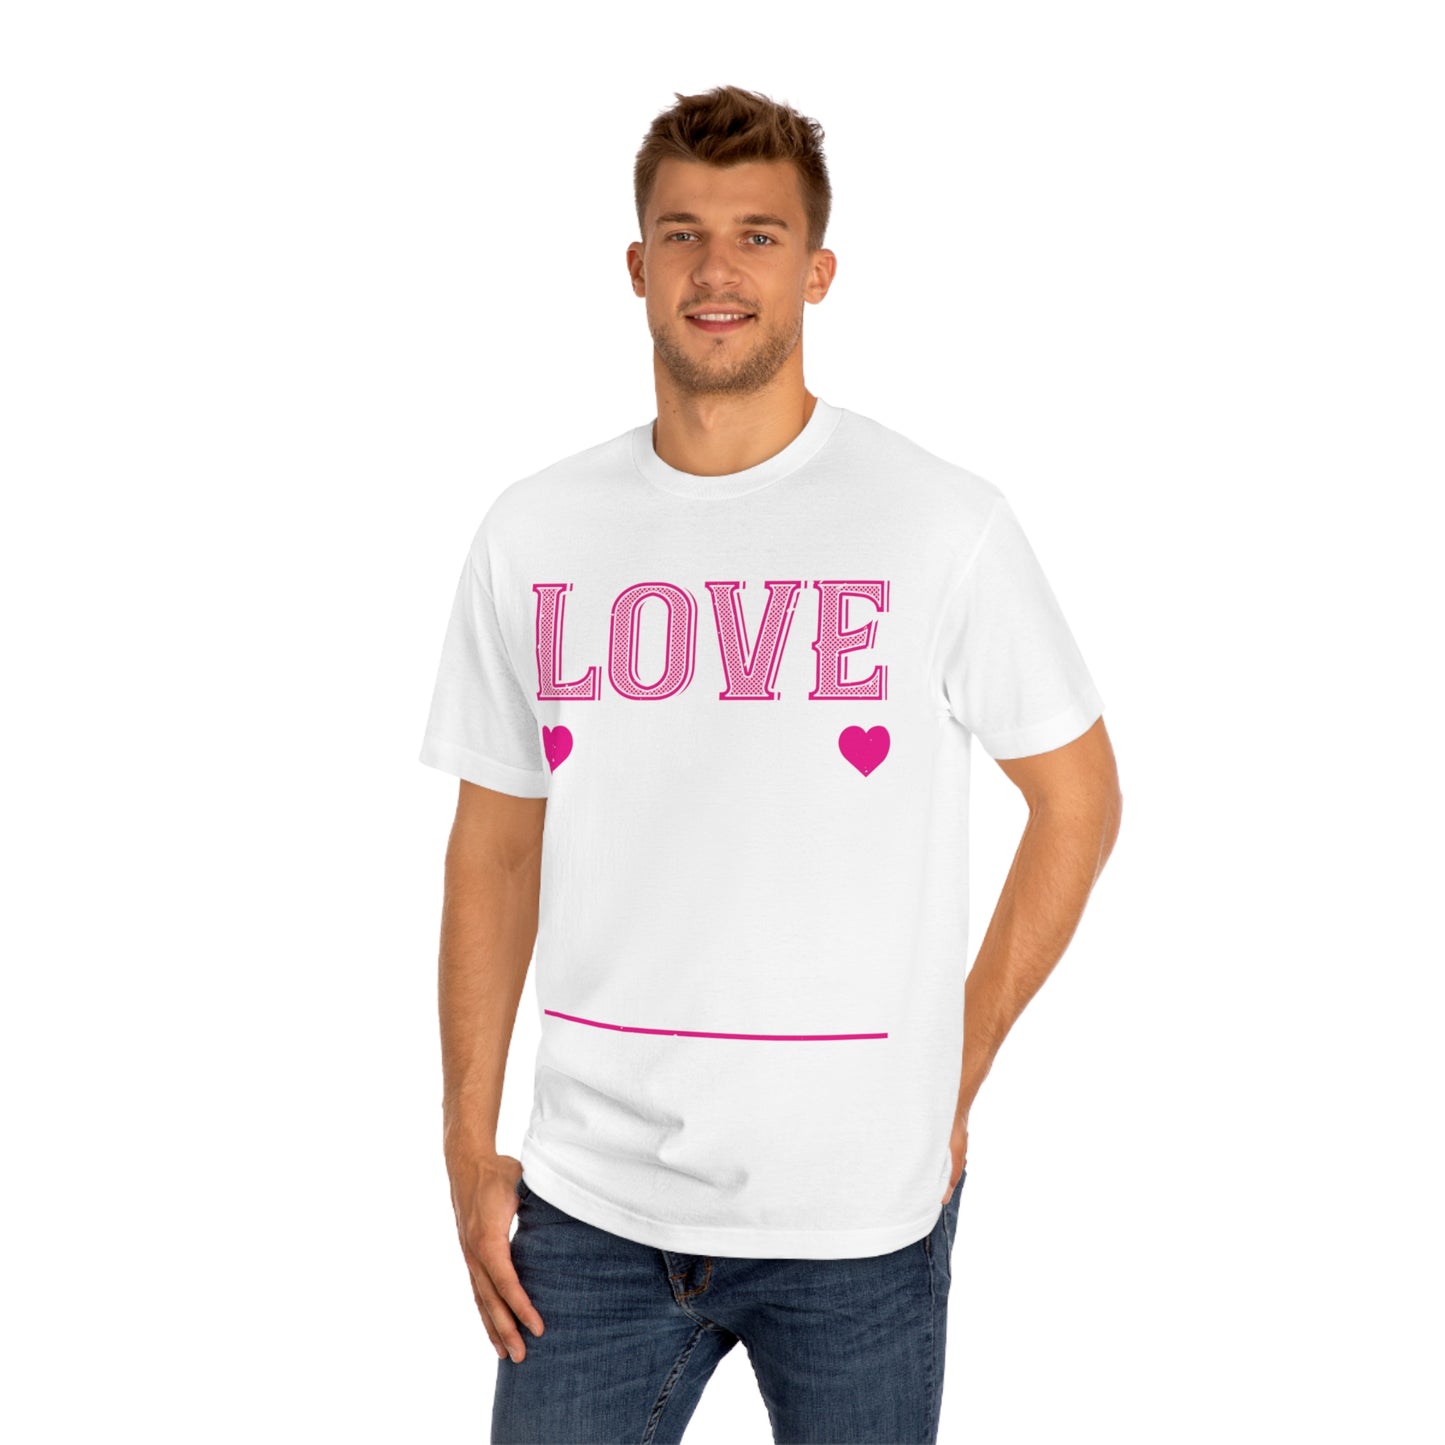 Love all the little things Unisex Classic Tee